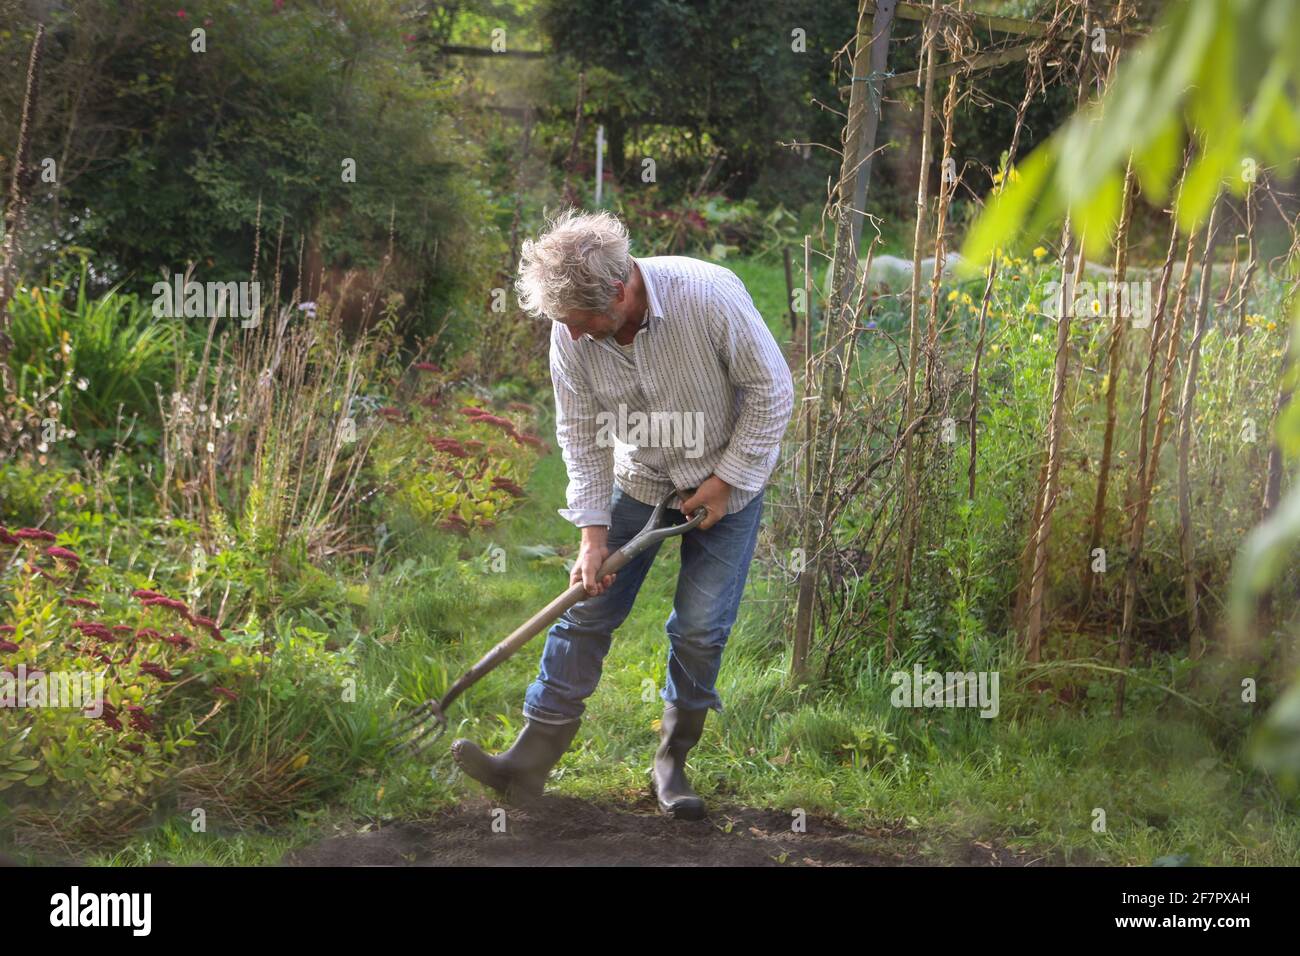 Mole Catcher. Gardener with a sharp fork waiting to catch a mole Stock Photo